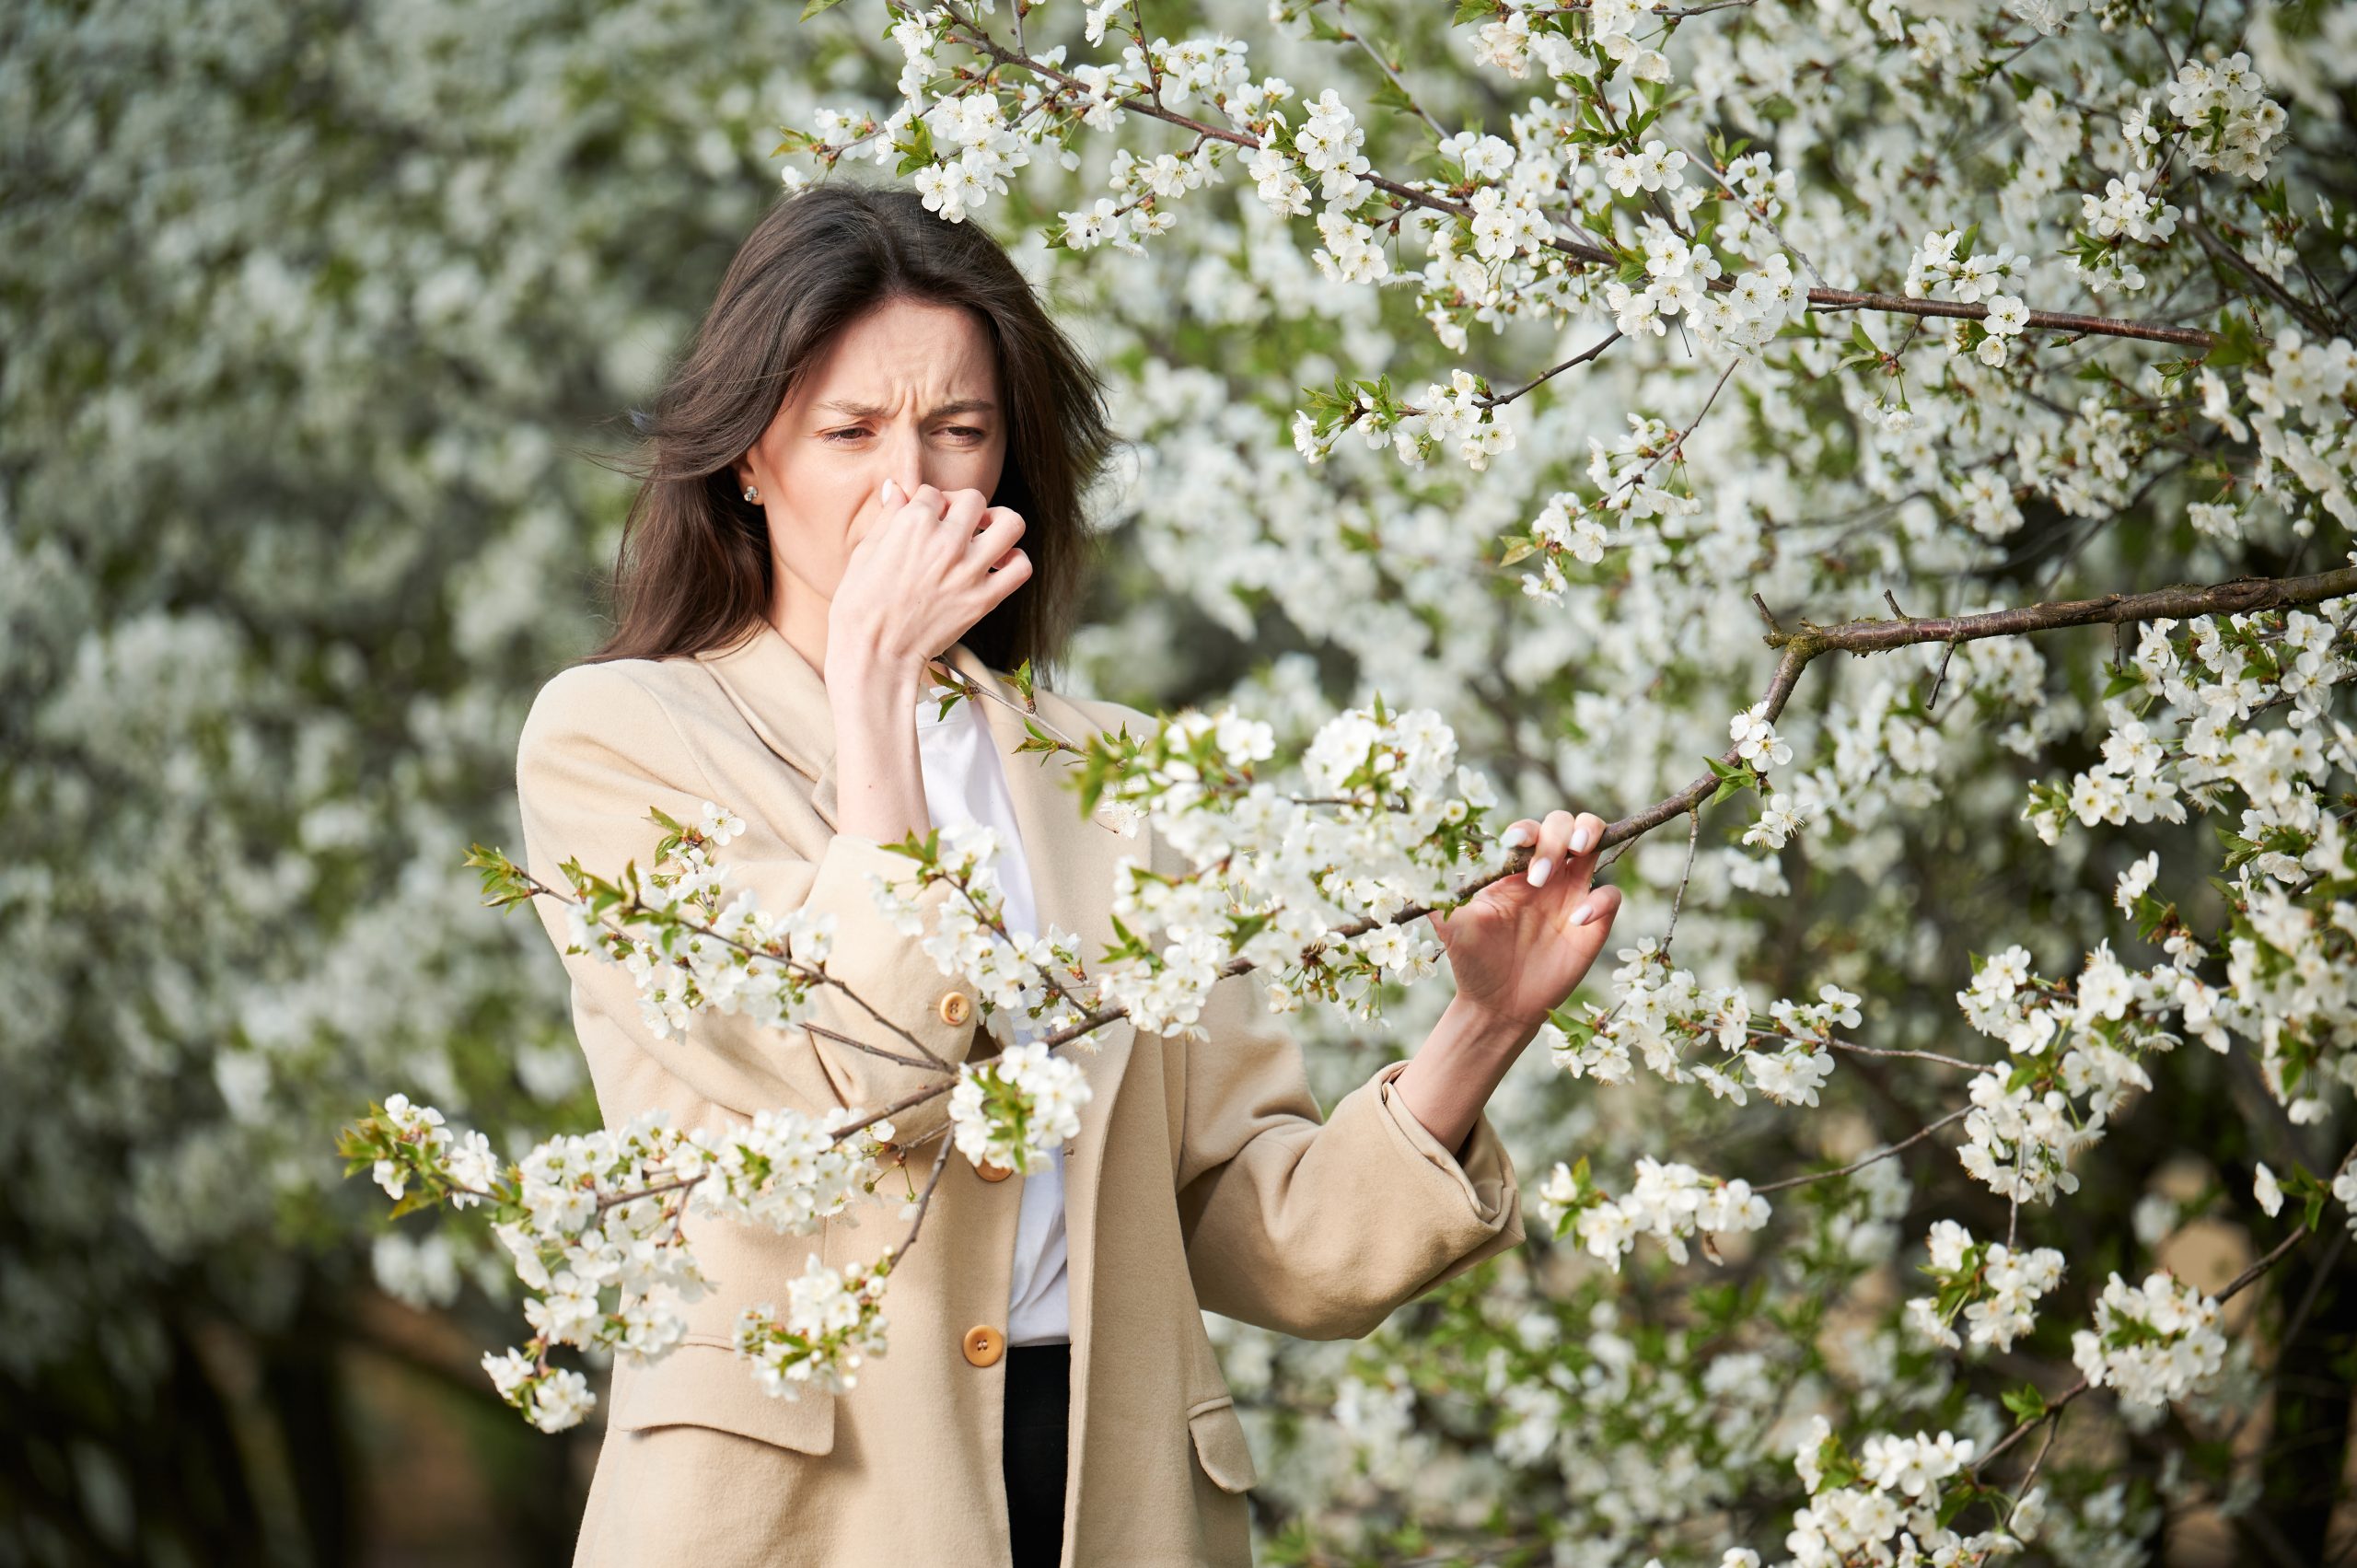 Woman allergic suffering from seasonal allergy at spring in blossoming garden at springtime. Young woman sneezing, having runny nose in front of blooming tree. Spring allergy concept